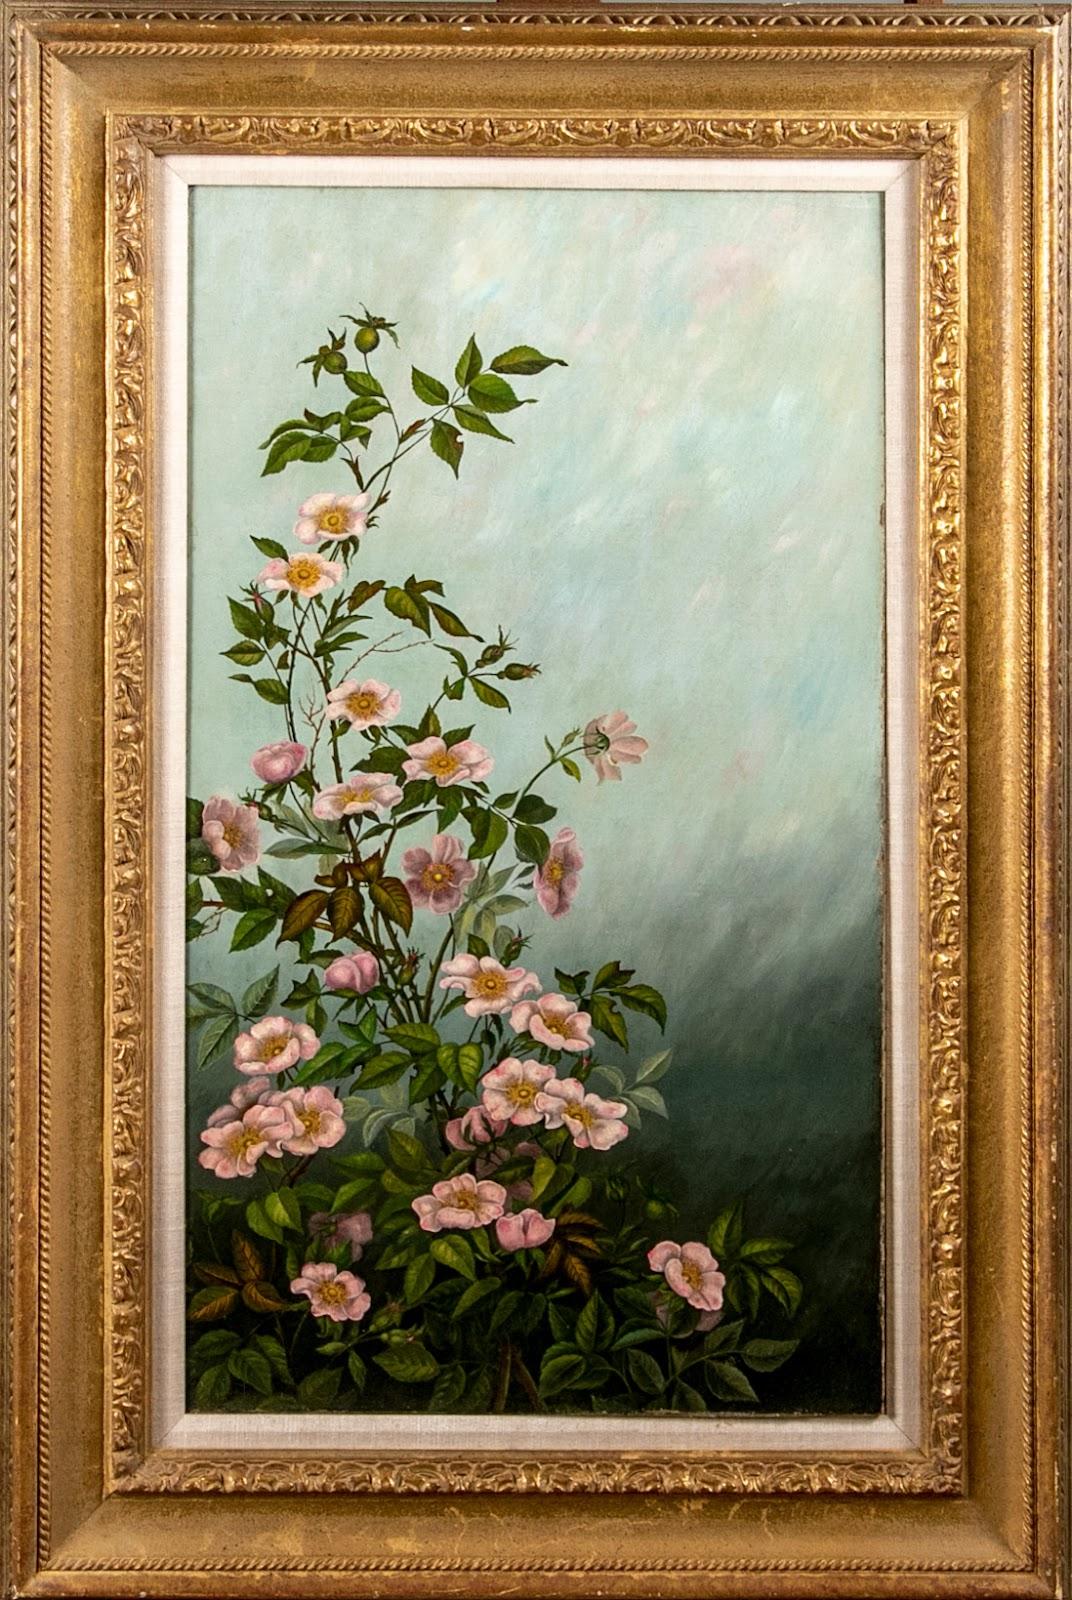 This lovely pink floral still-life is charming and classic.